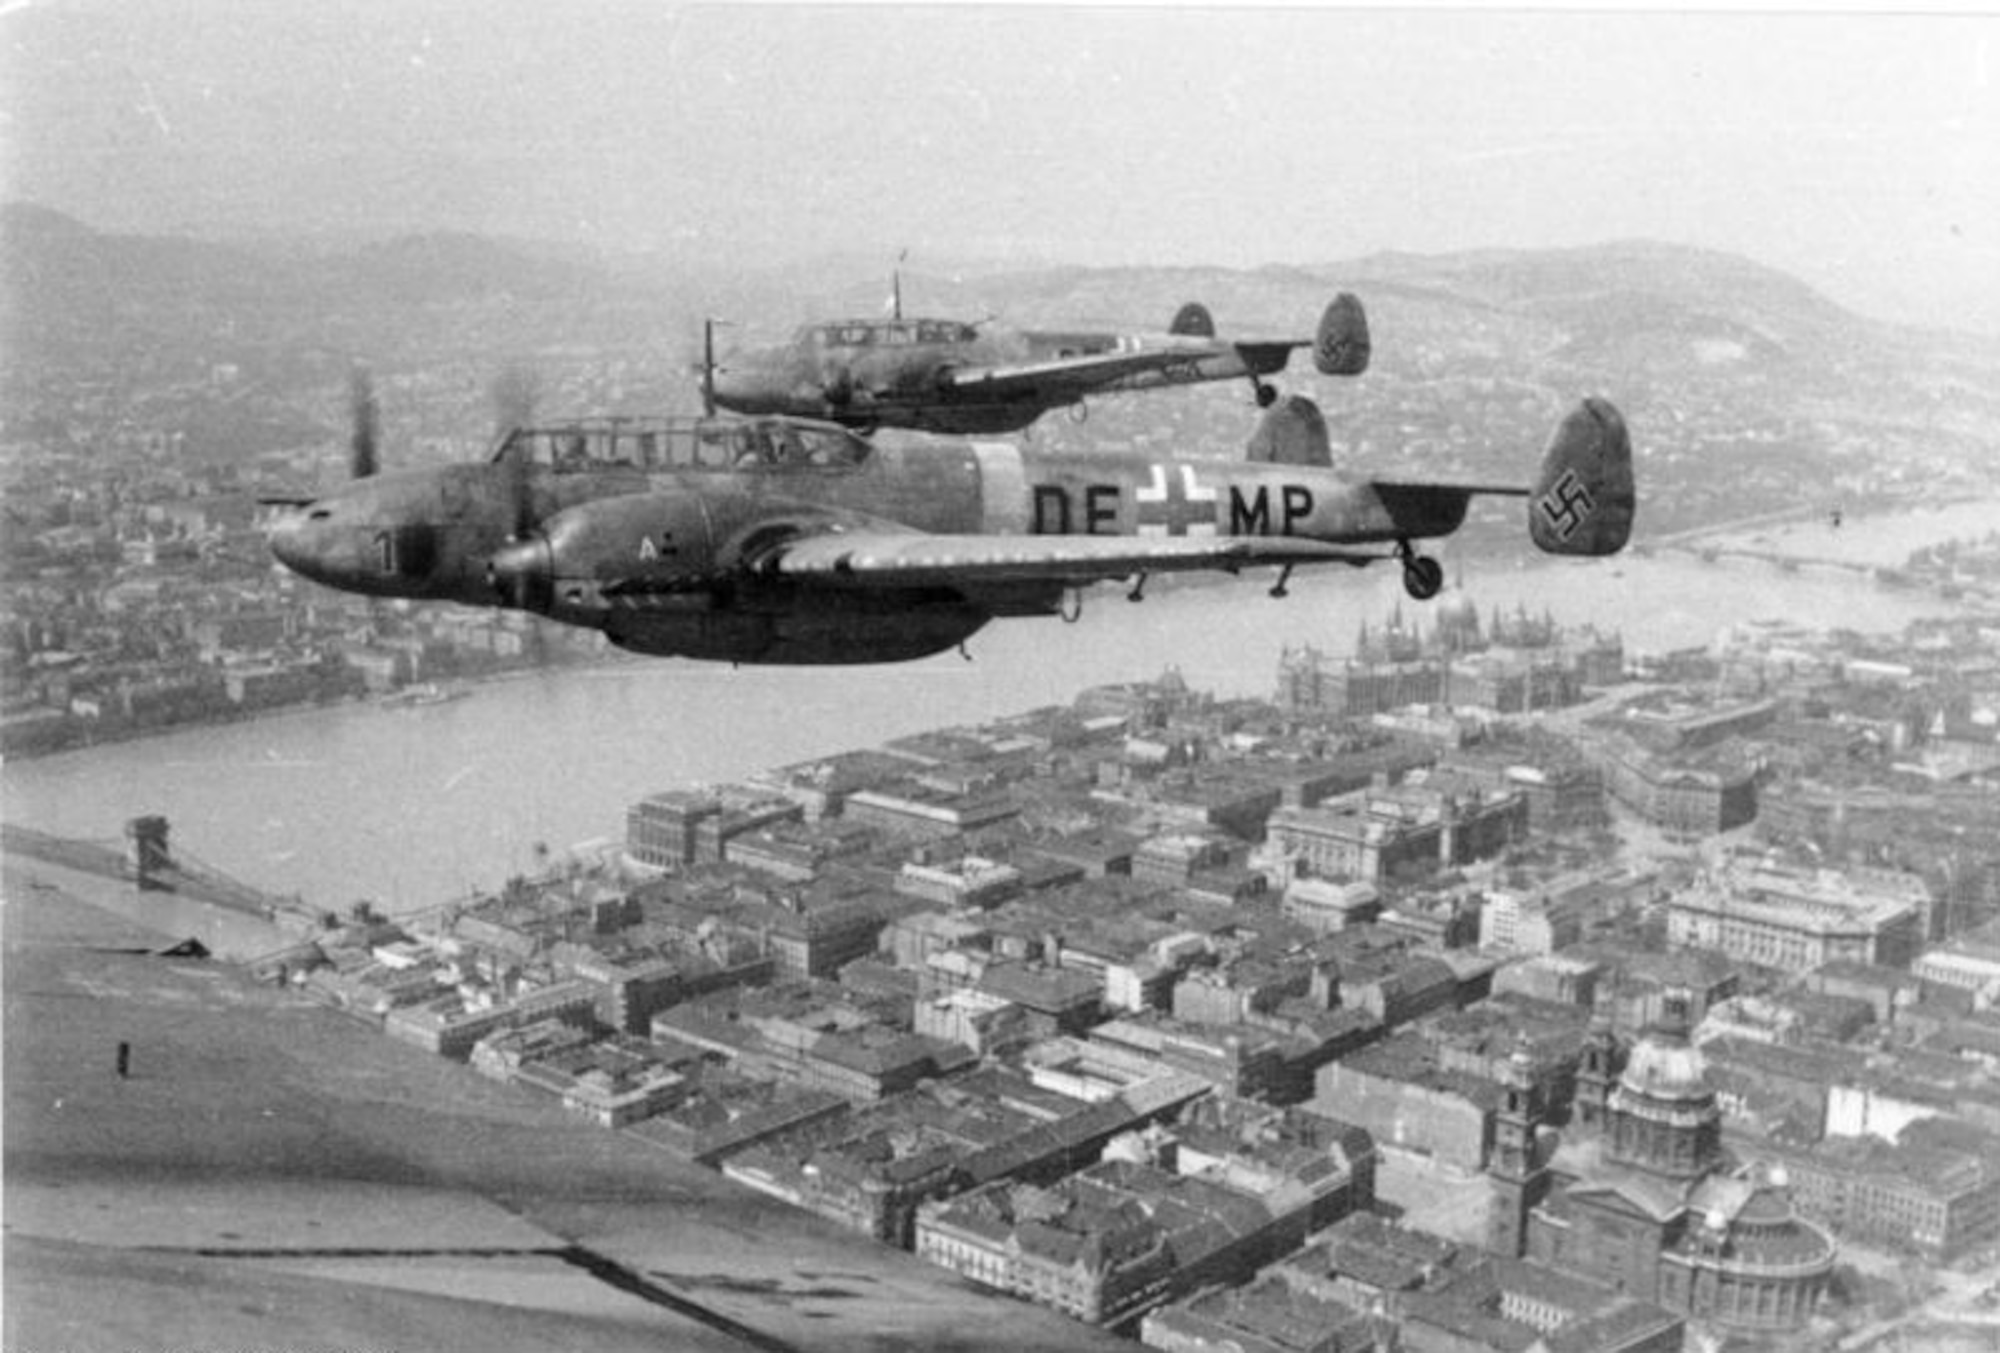 A pair of Messerschmitt Me-110 (also knowns as Bf-110) Zerstorer (Destroyer) fighters from the are pictured over Budapest, Hungary in 1944; the fuselage code of the aircraft nearest (DE+MP) indicates the aircraft were assigned to Ausbildungs Kommando Zerstorer, a training  unit for Hungarian air units operating the type (unit ID by Heikki Hyttinen).  Two Me-110s from Jagdgeschwader 400 at Brandis Airfield, Germany were involved in the fateful aerial encounter of 13 April 1945 near Hainichen involving P-47s of the 406th Fighter Squadron, 371st Fighter Group and Capt. William T. Bales, Jr.  (Deutsch Bundesarchiv, via Wikipedia)